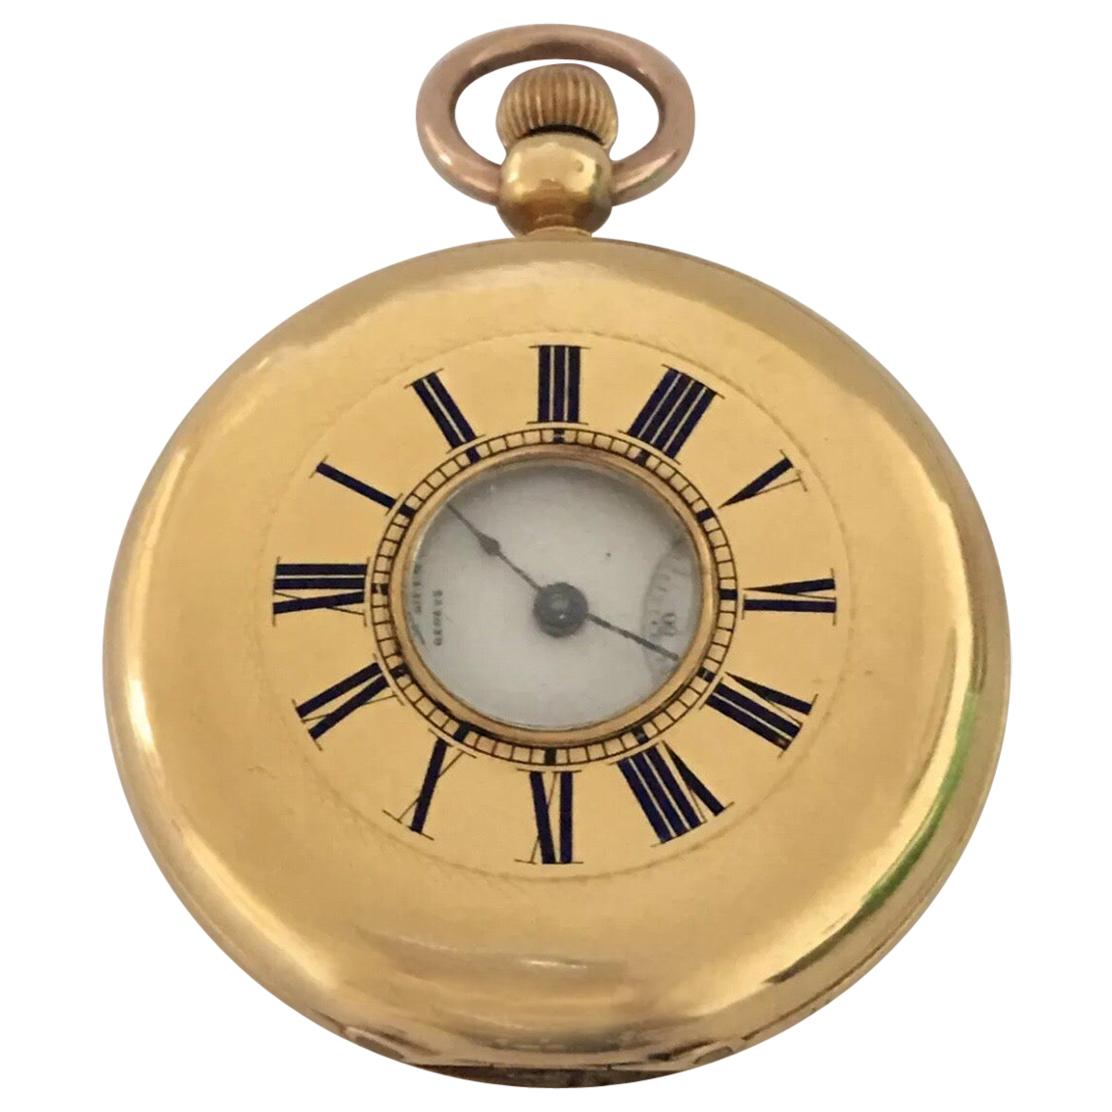 18K Gold Patek, Philippe & Co. Geneve Half Hunter  Keyless Pocket Watch.


This 45mm diameter antique hand winding pocket watch is in good working condition and is ticking well. Visible signs of ageing and wear with the winder is a bit loose but it